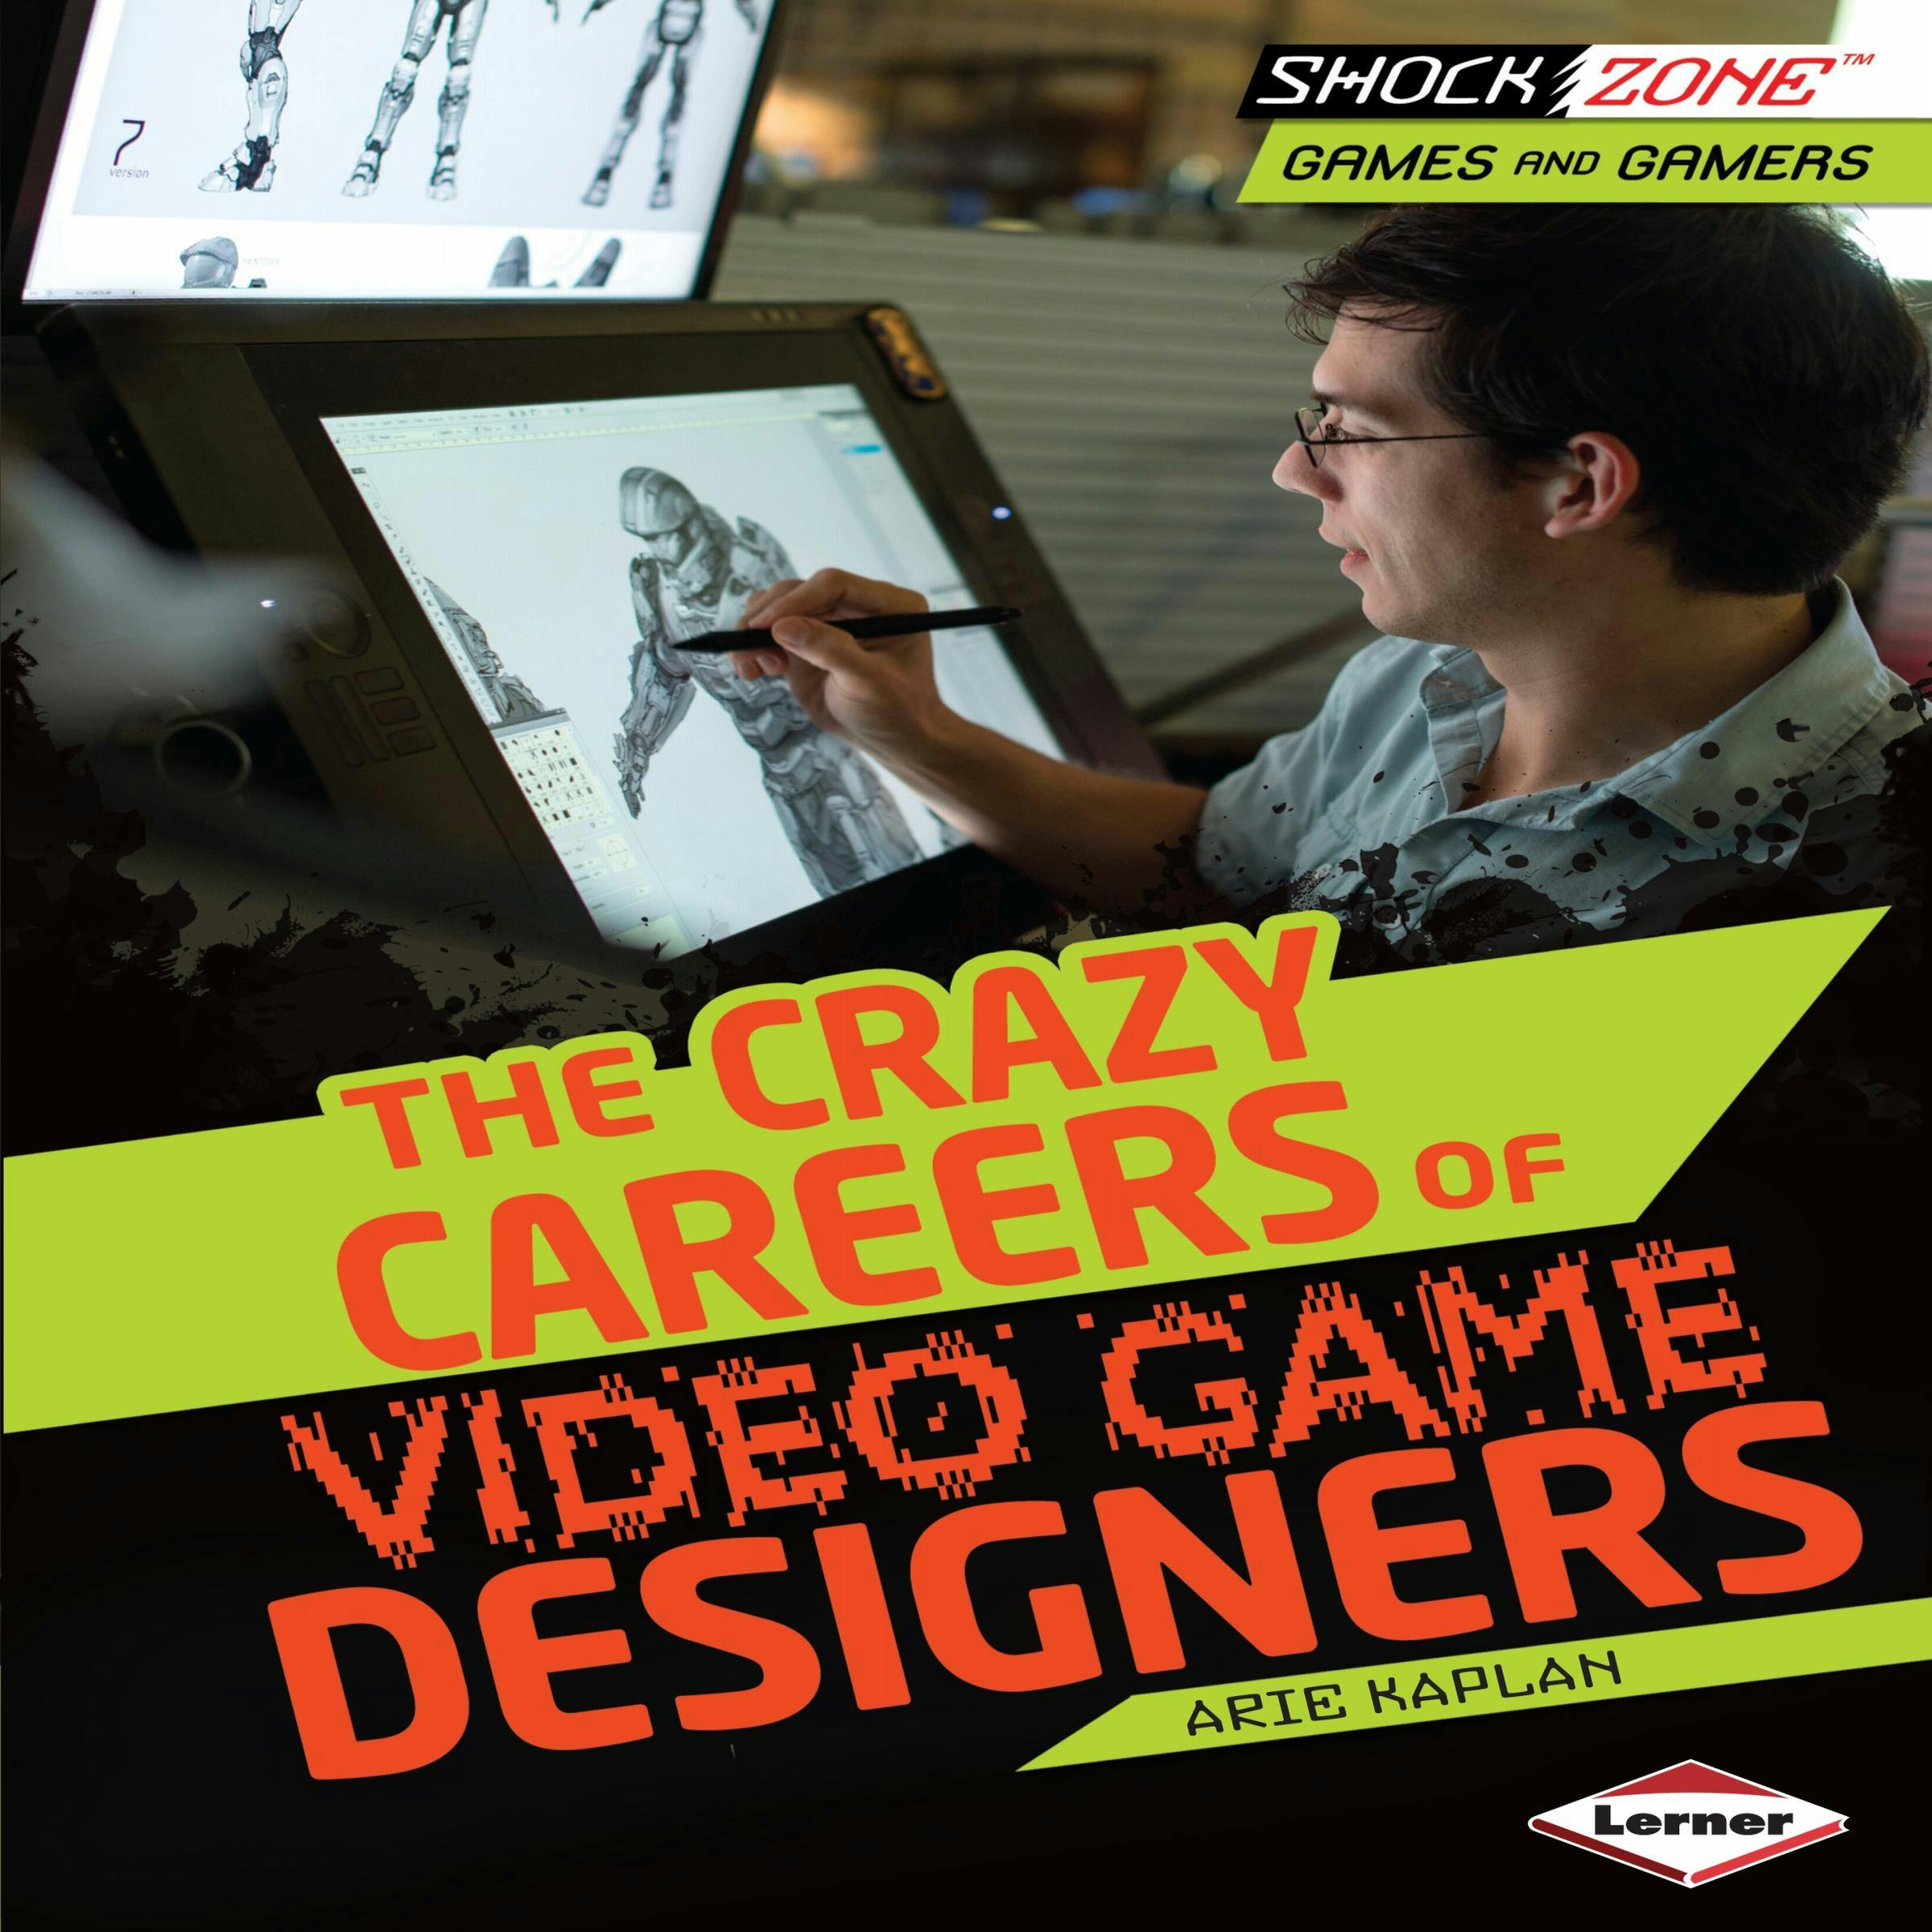 The Crazy Careers of Video Game Designers - Arie Kaplan